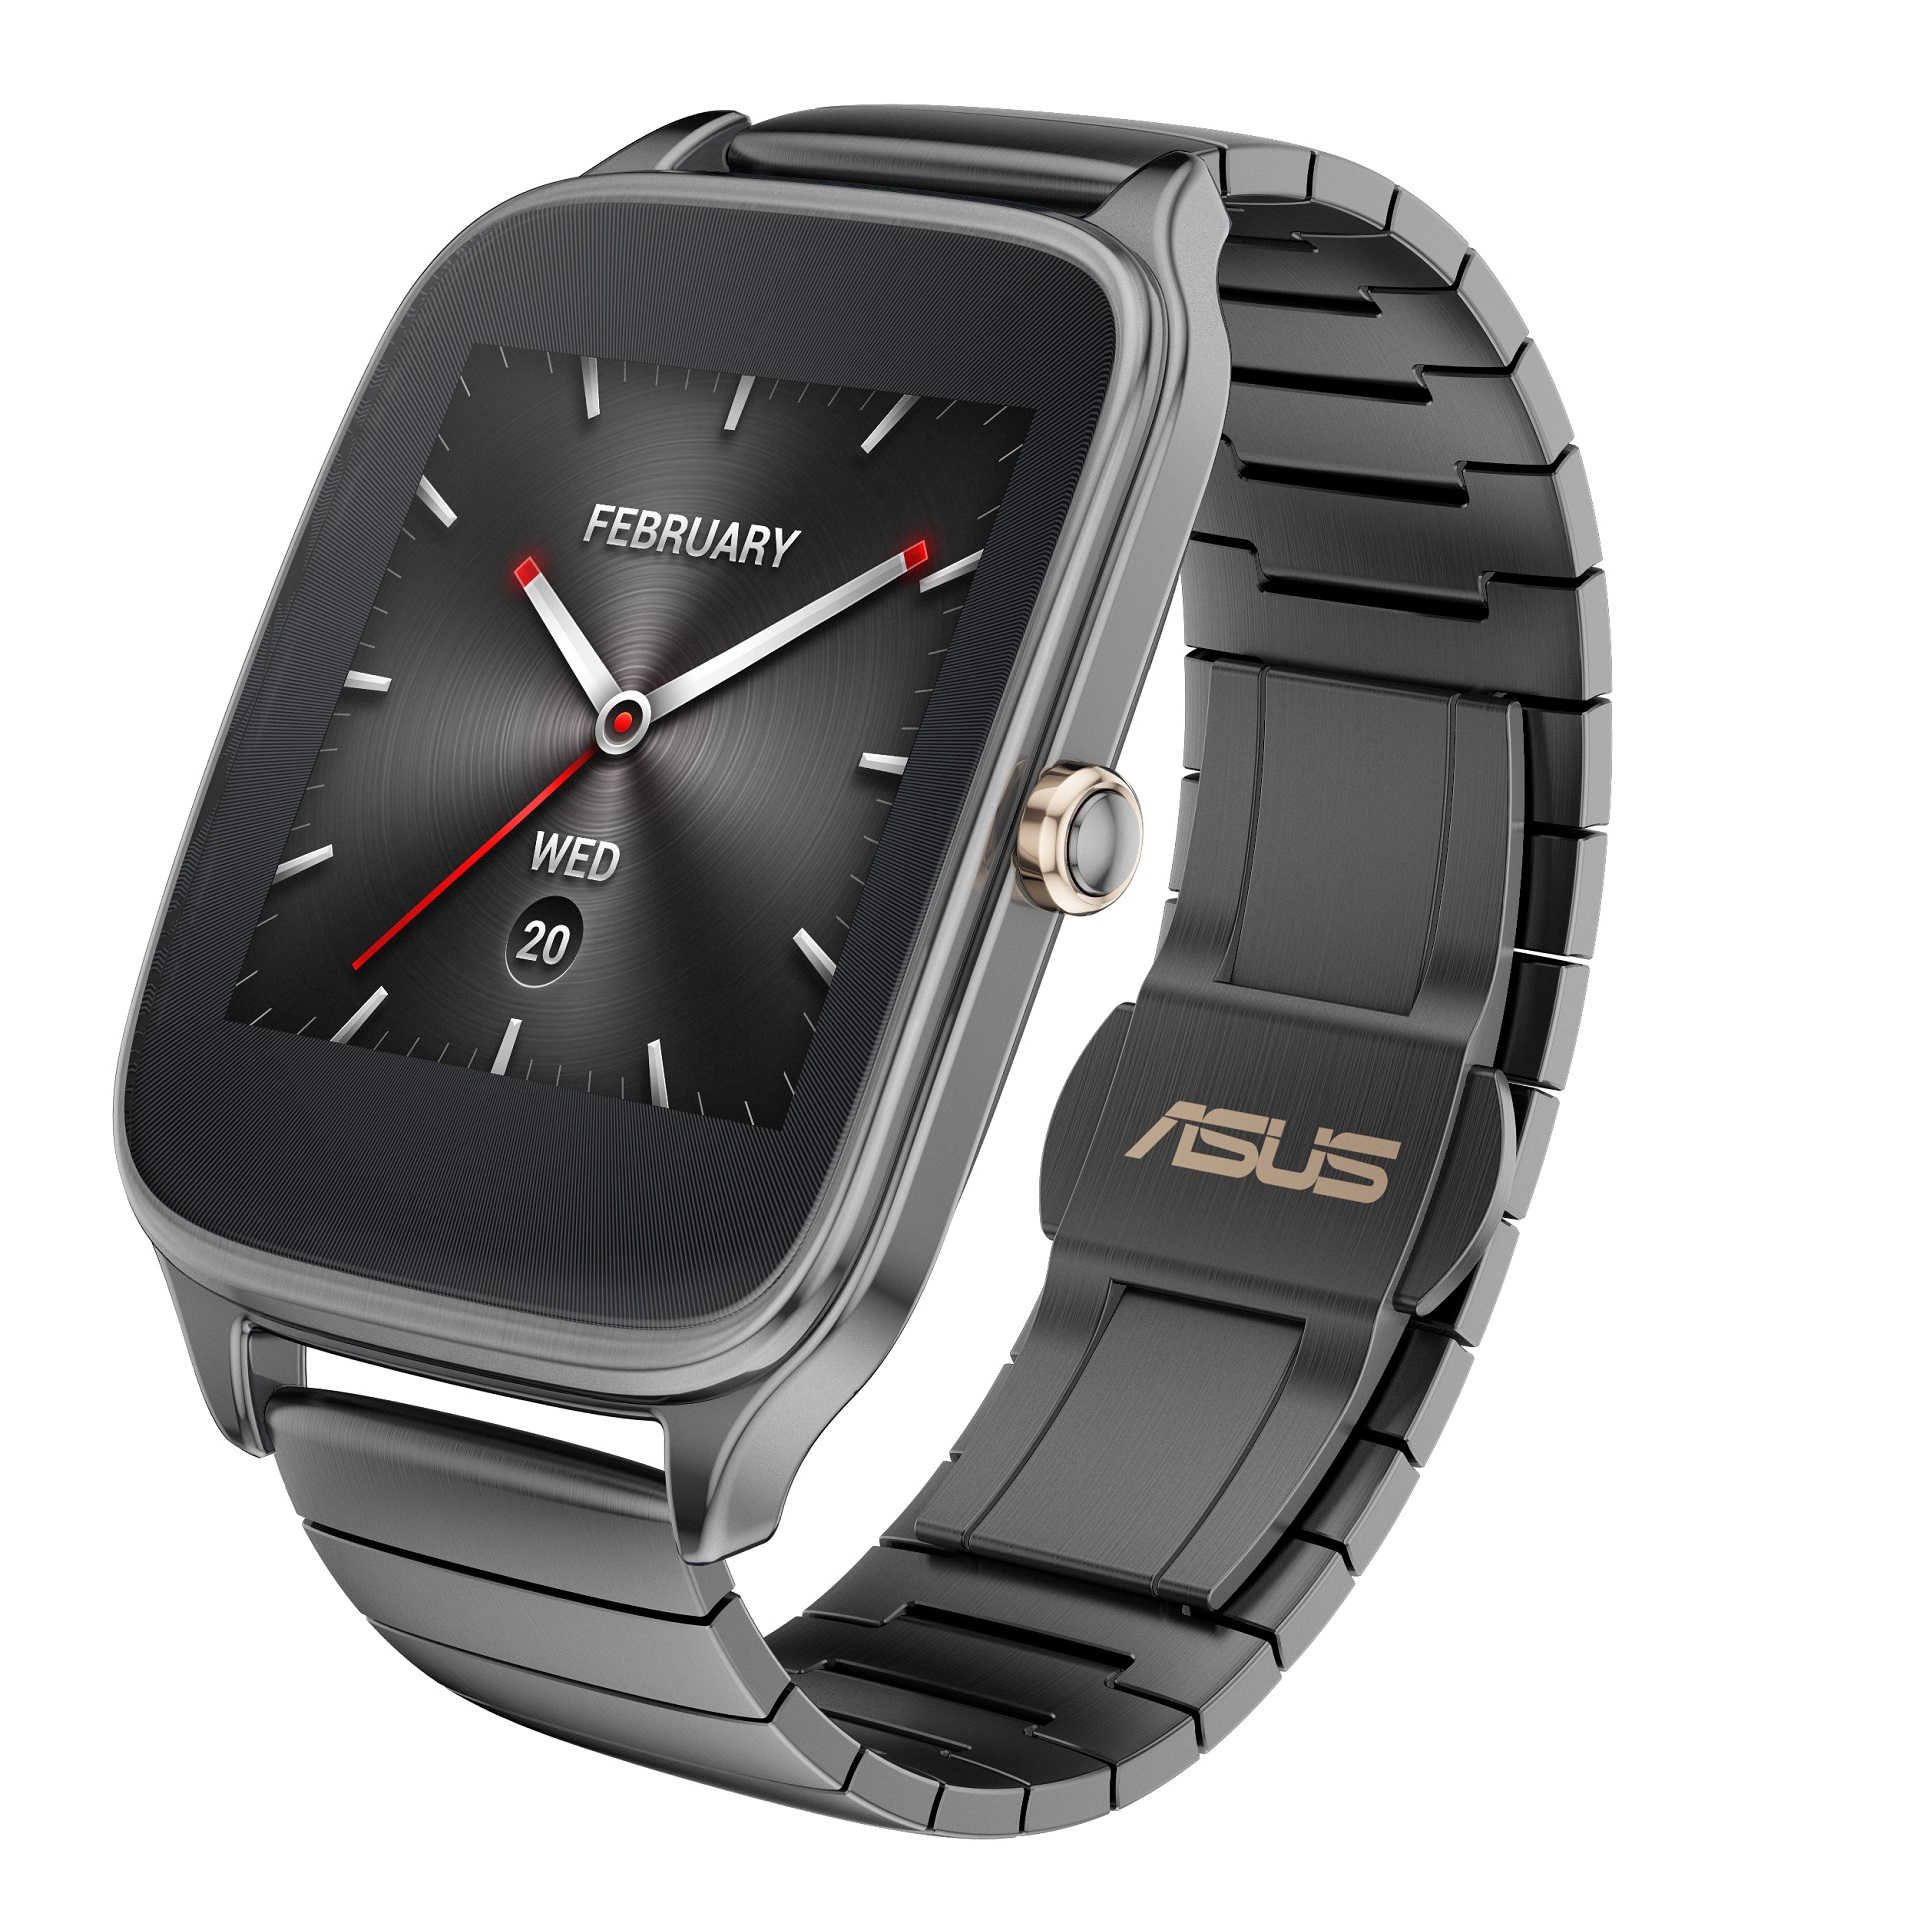  for ASUS Zenwatch 2 WI501Q Smart Watch Battery